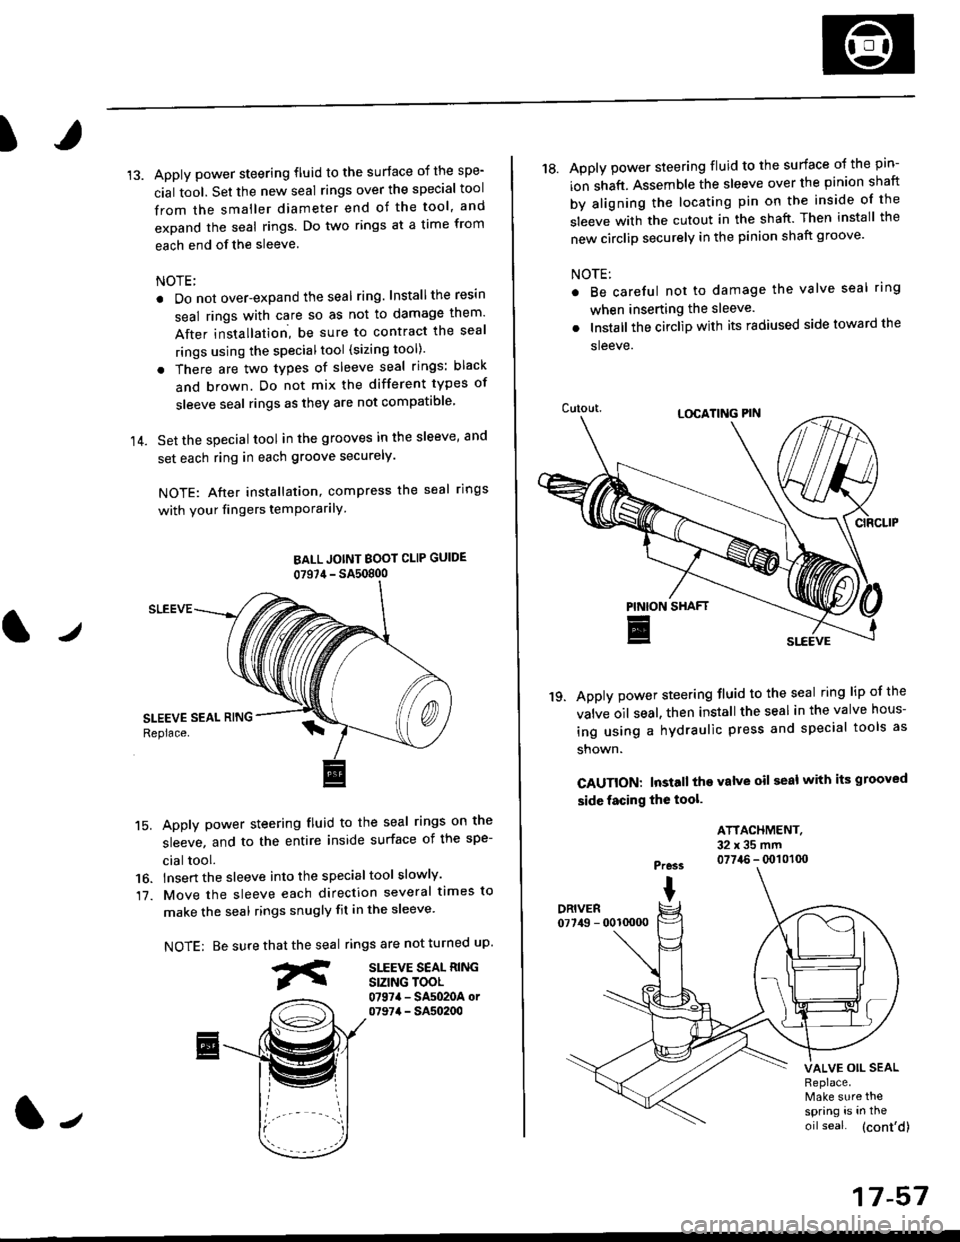 HONDA CIVIC 1998 6.G Owners Guide I
14.
Apply power steering fluid to the surface of the spe-
cial tool. Set the new seal rings over the special tool
from the smaller diameter end of the tool, and
expand the seal rings. Do two rings a